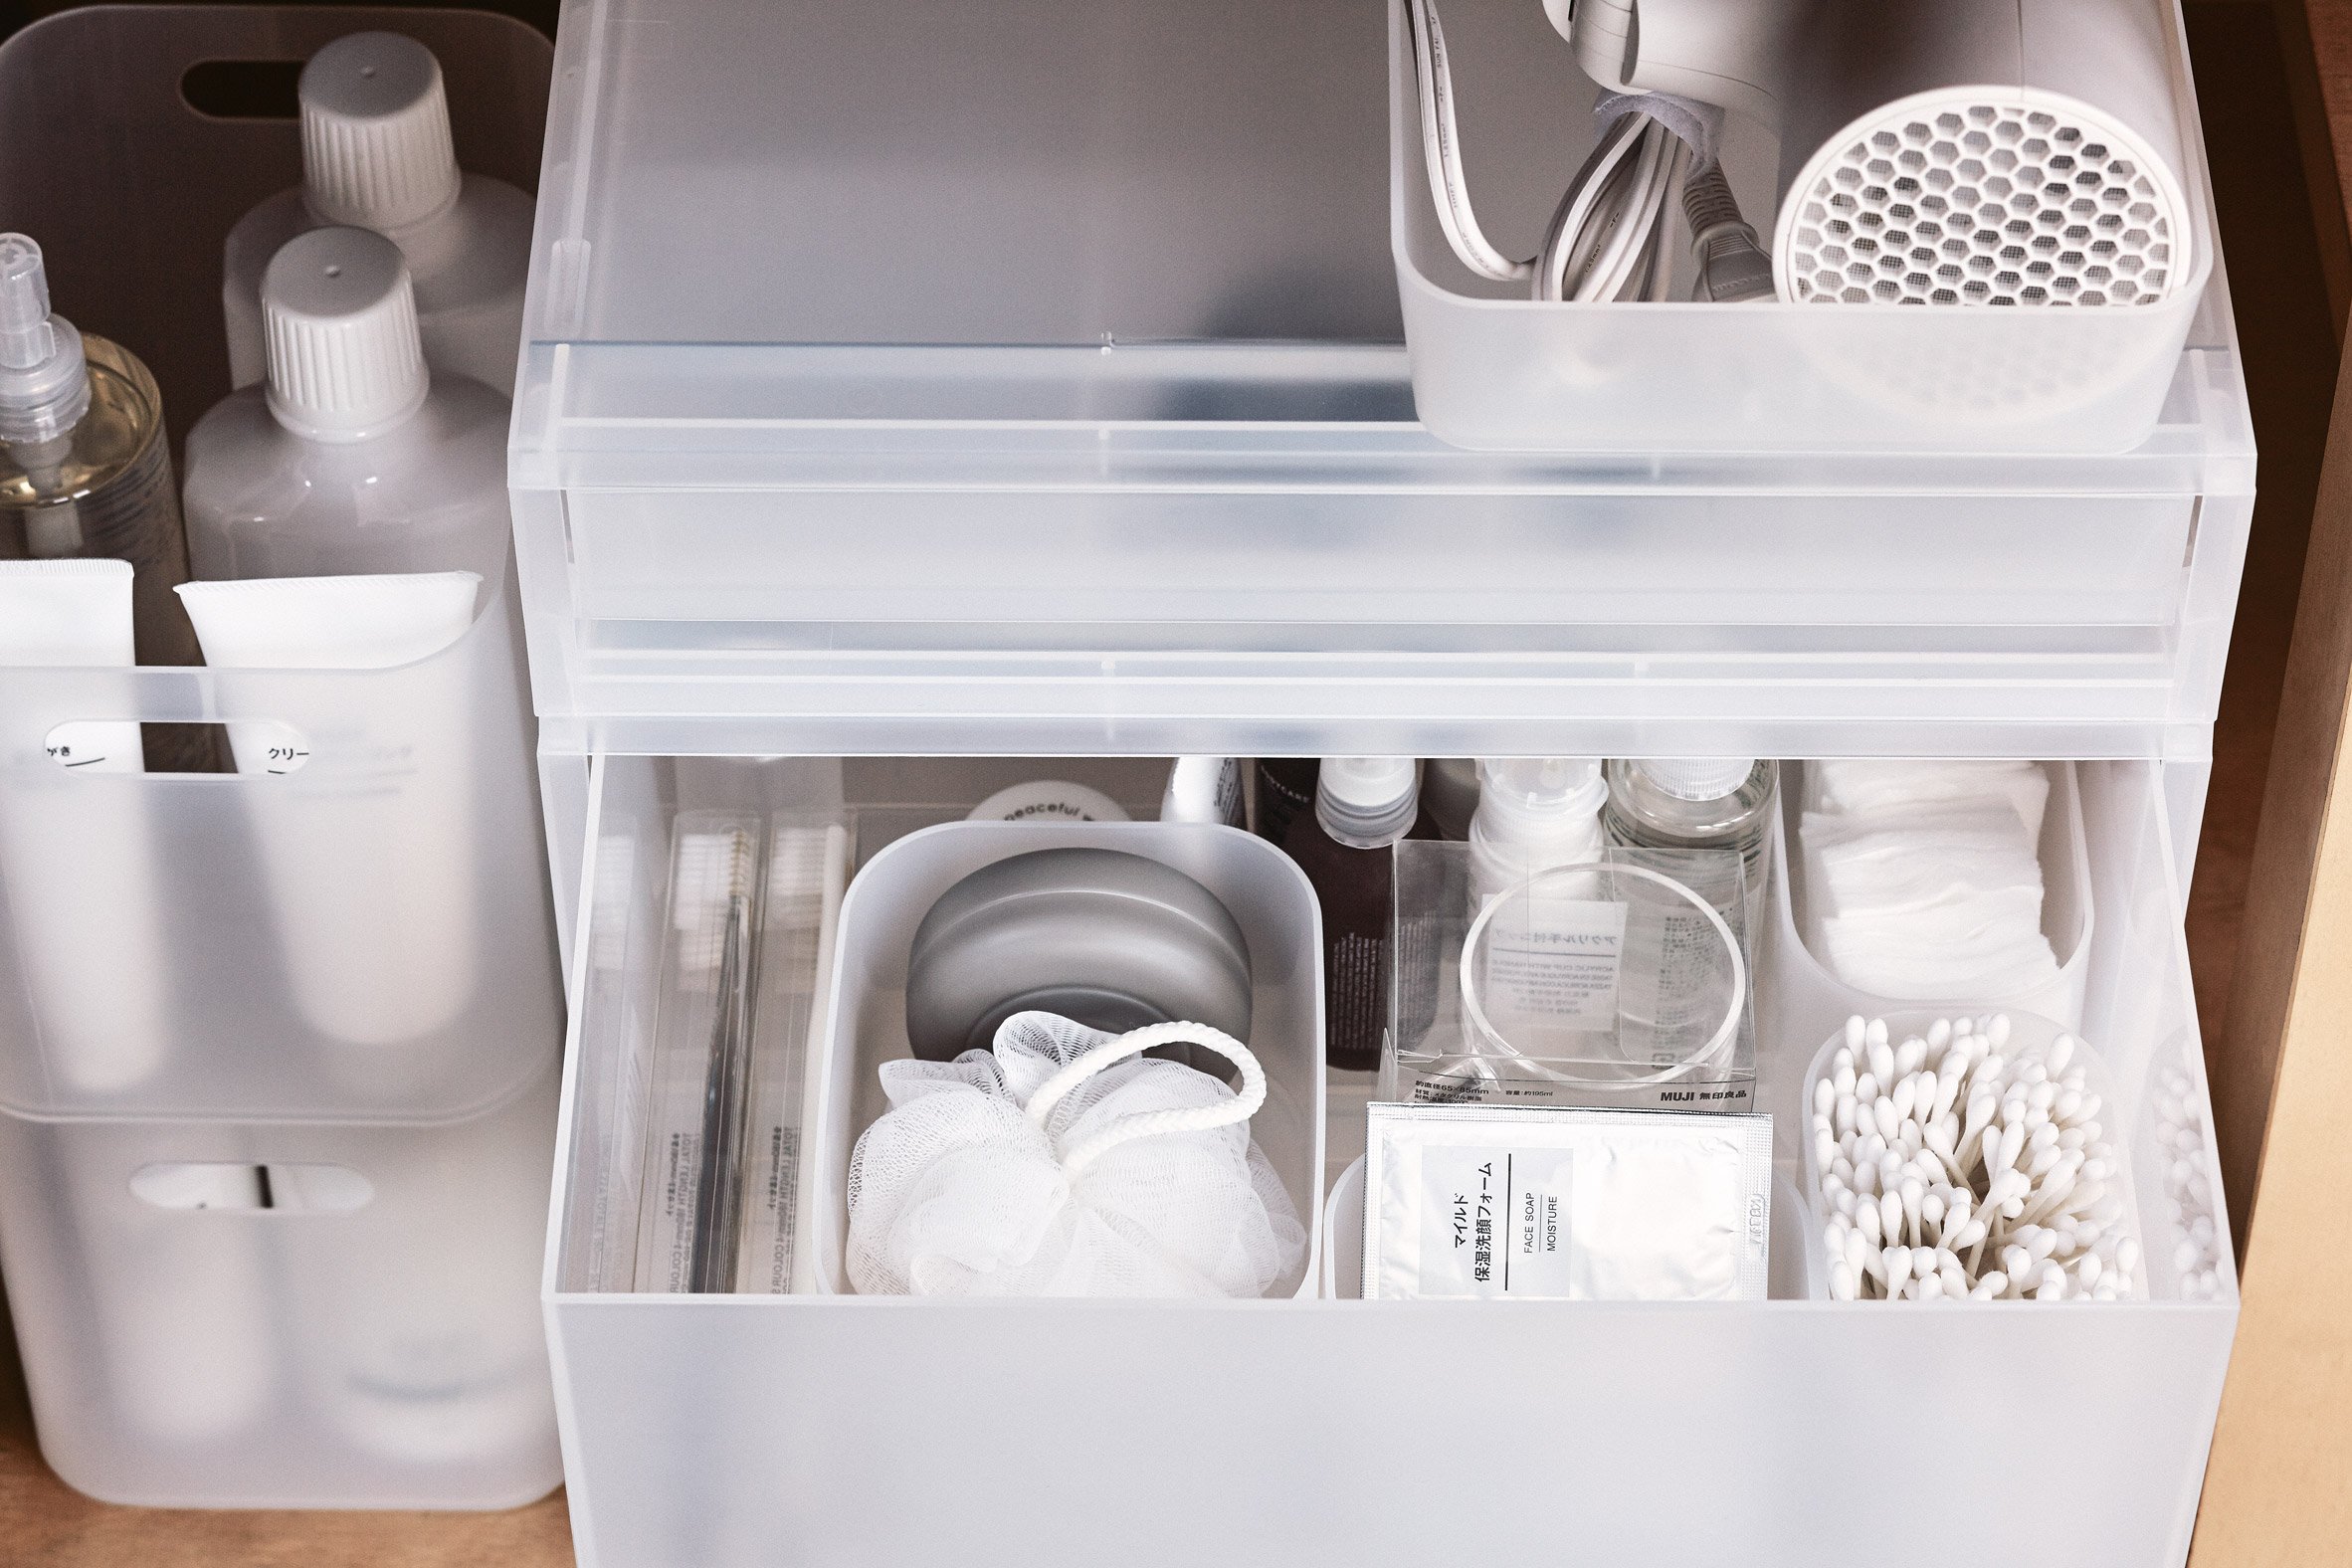 Muji's storage solutions aim to improve the efficiency of your life